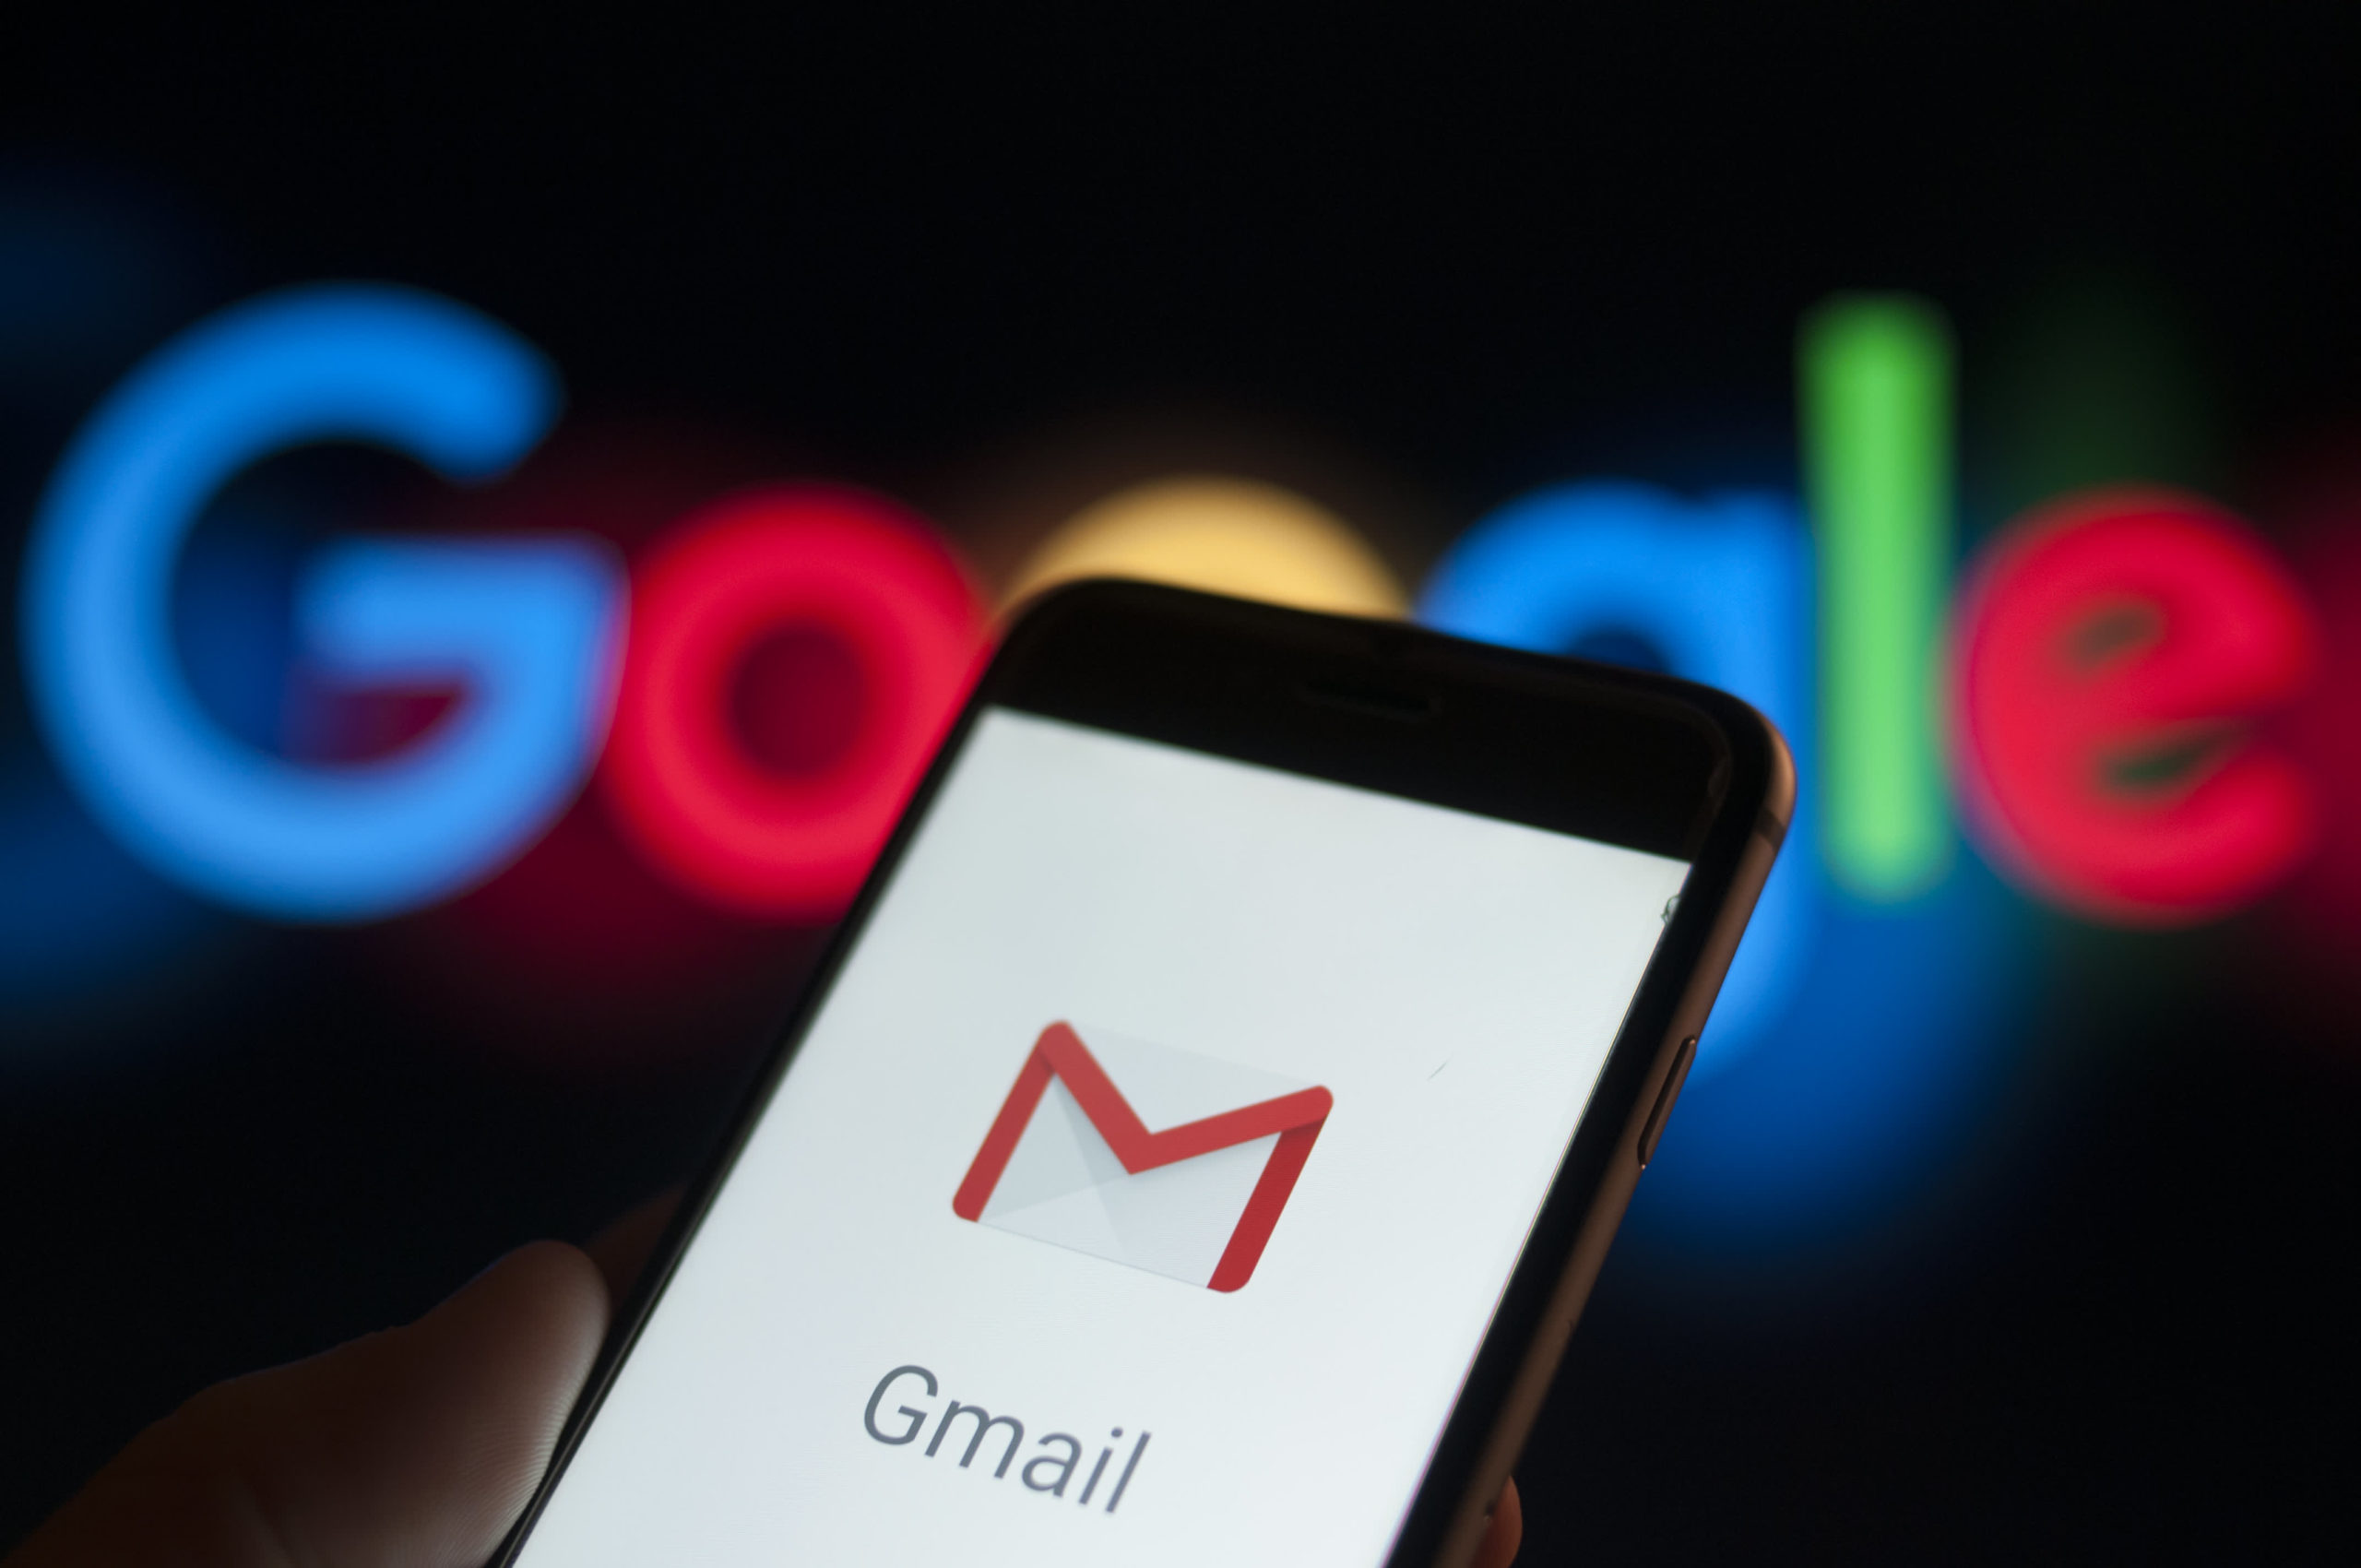 Gmail has been blown up after an inbox issue